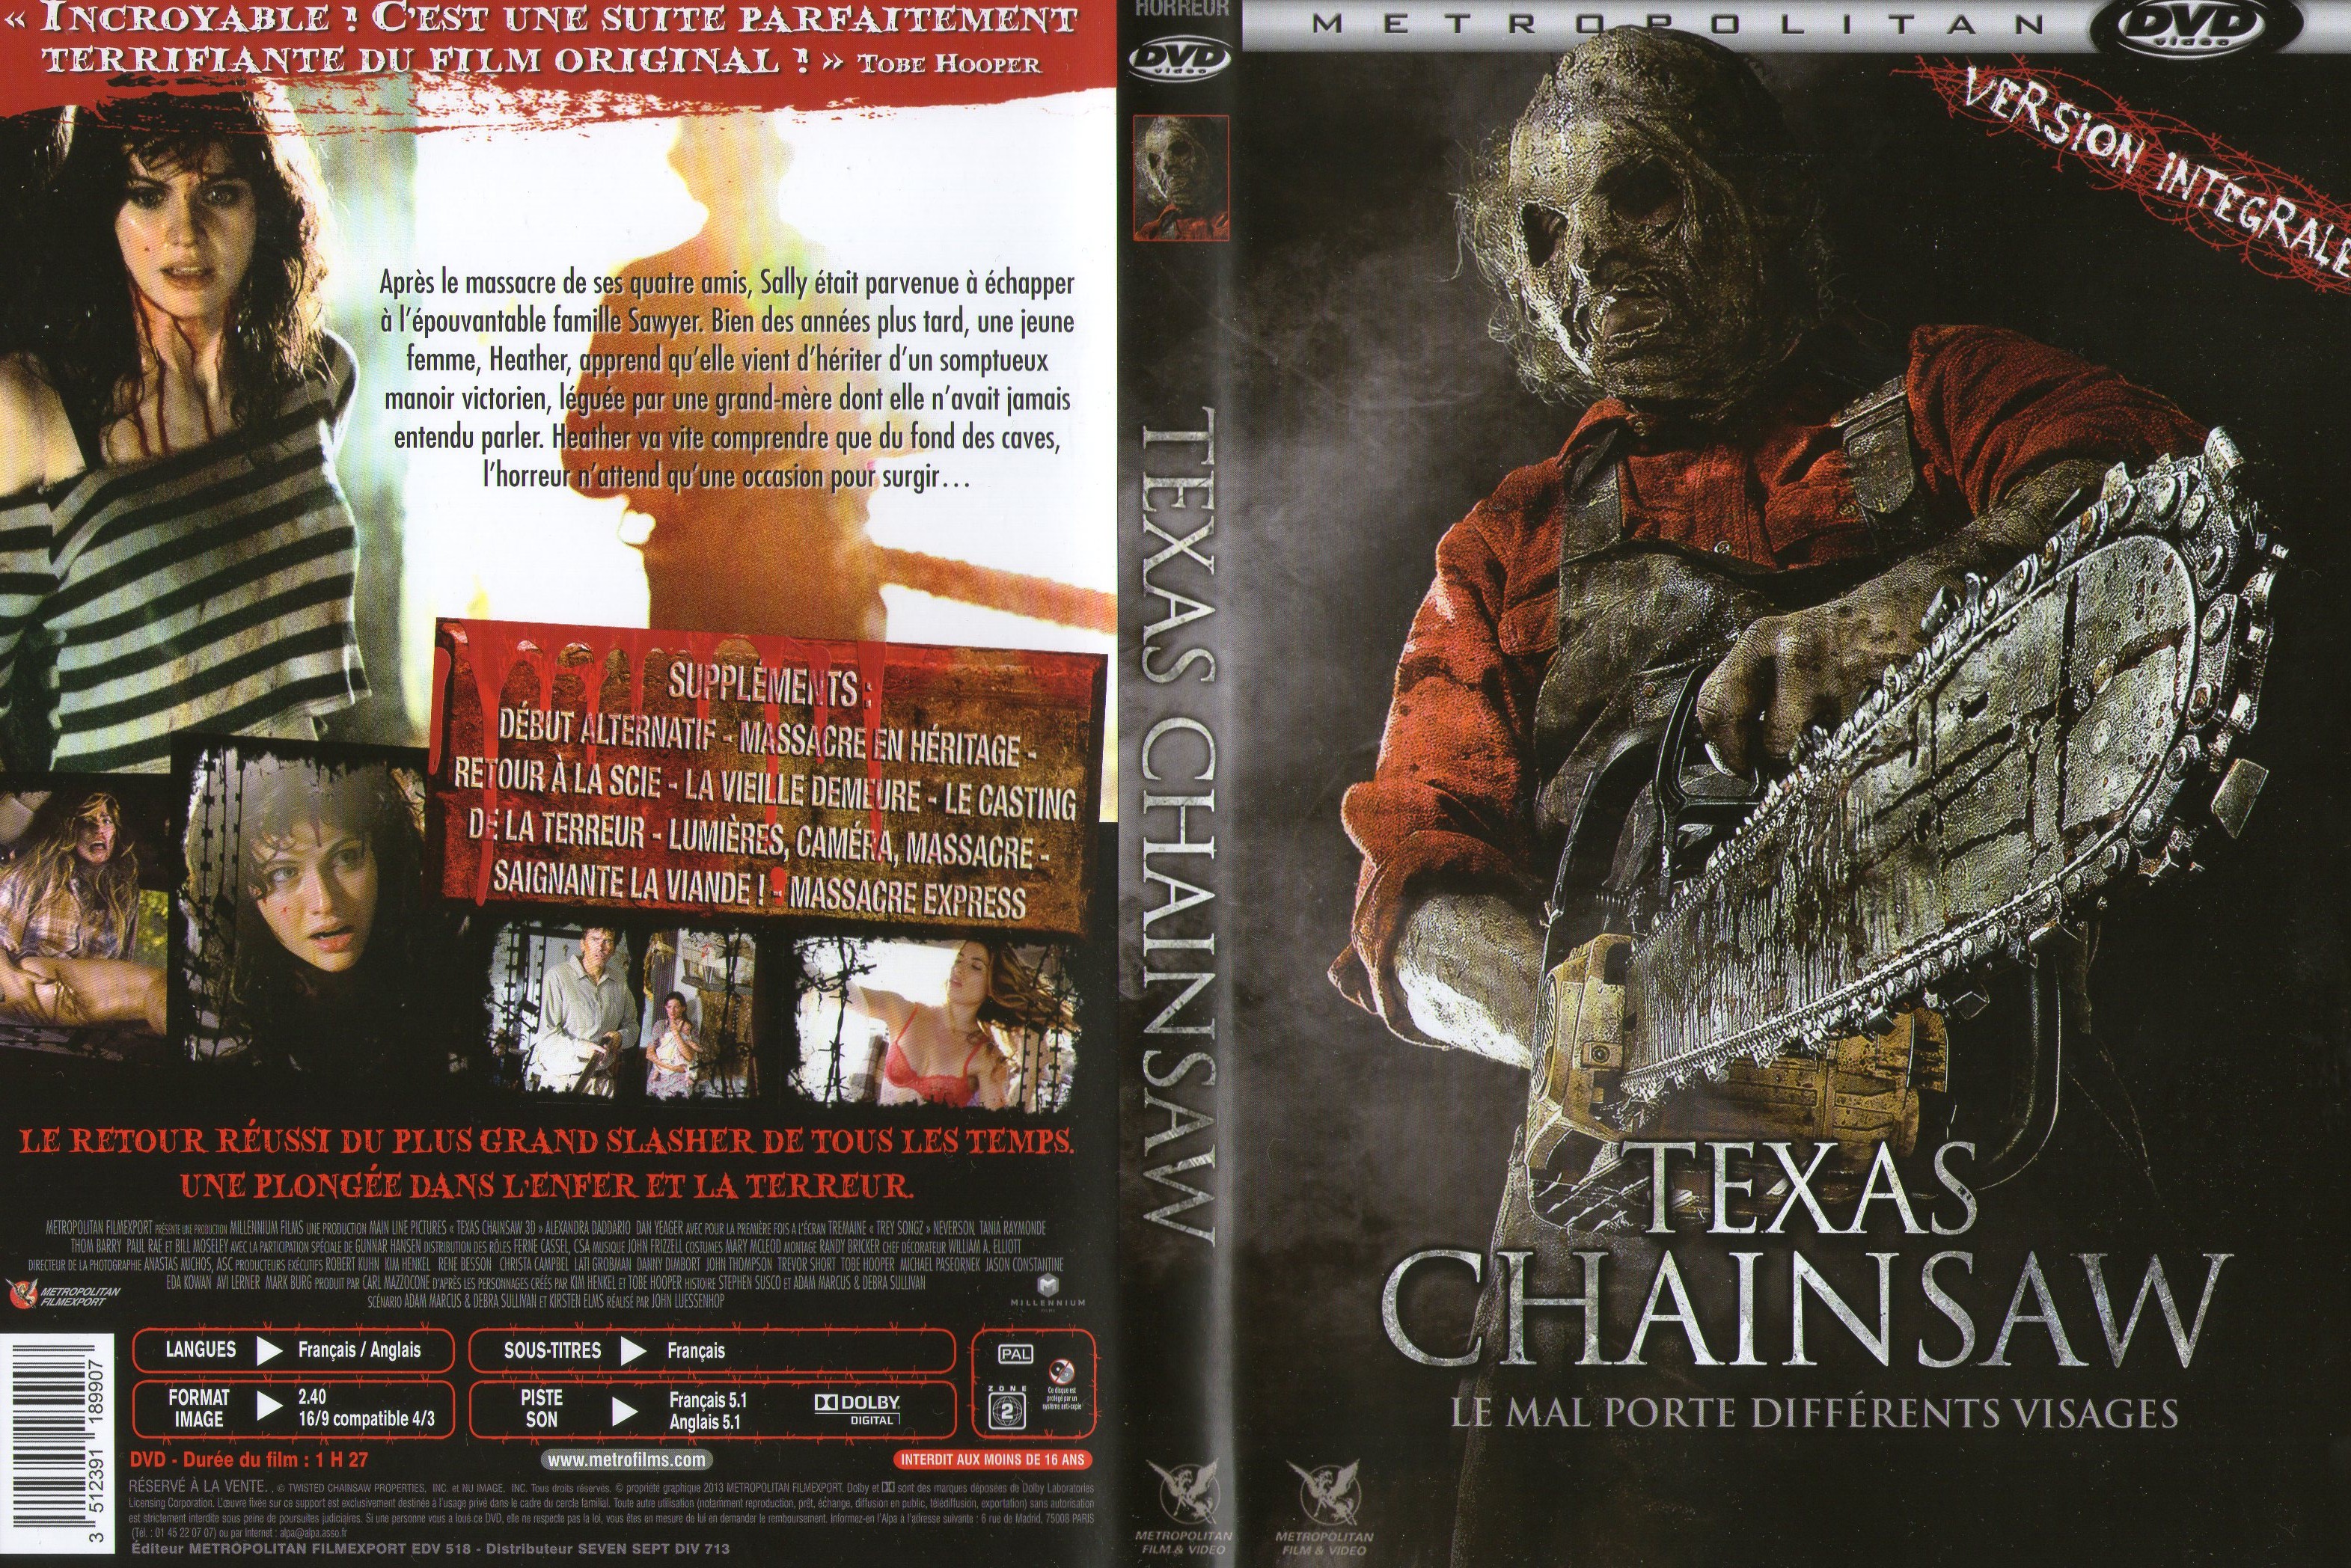 Jaquette DVD Texas Chainsaw